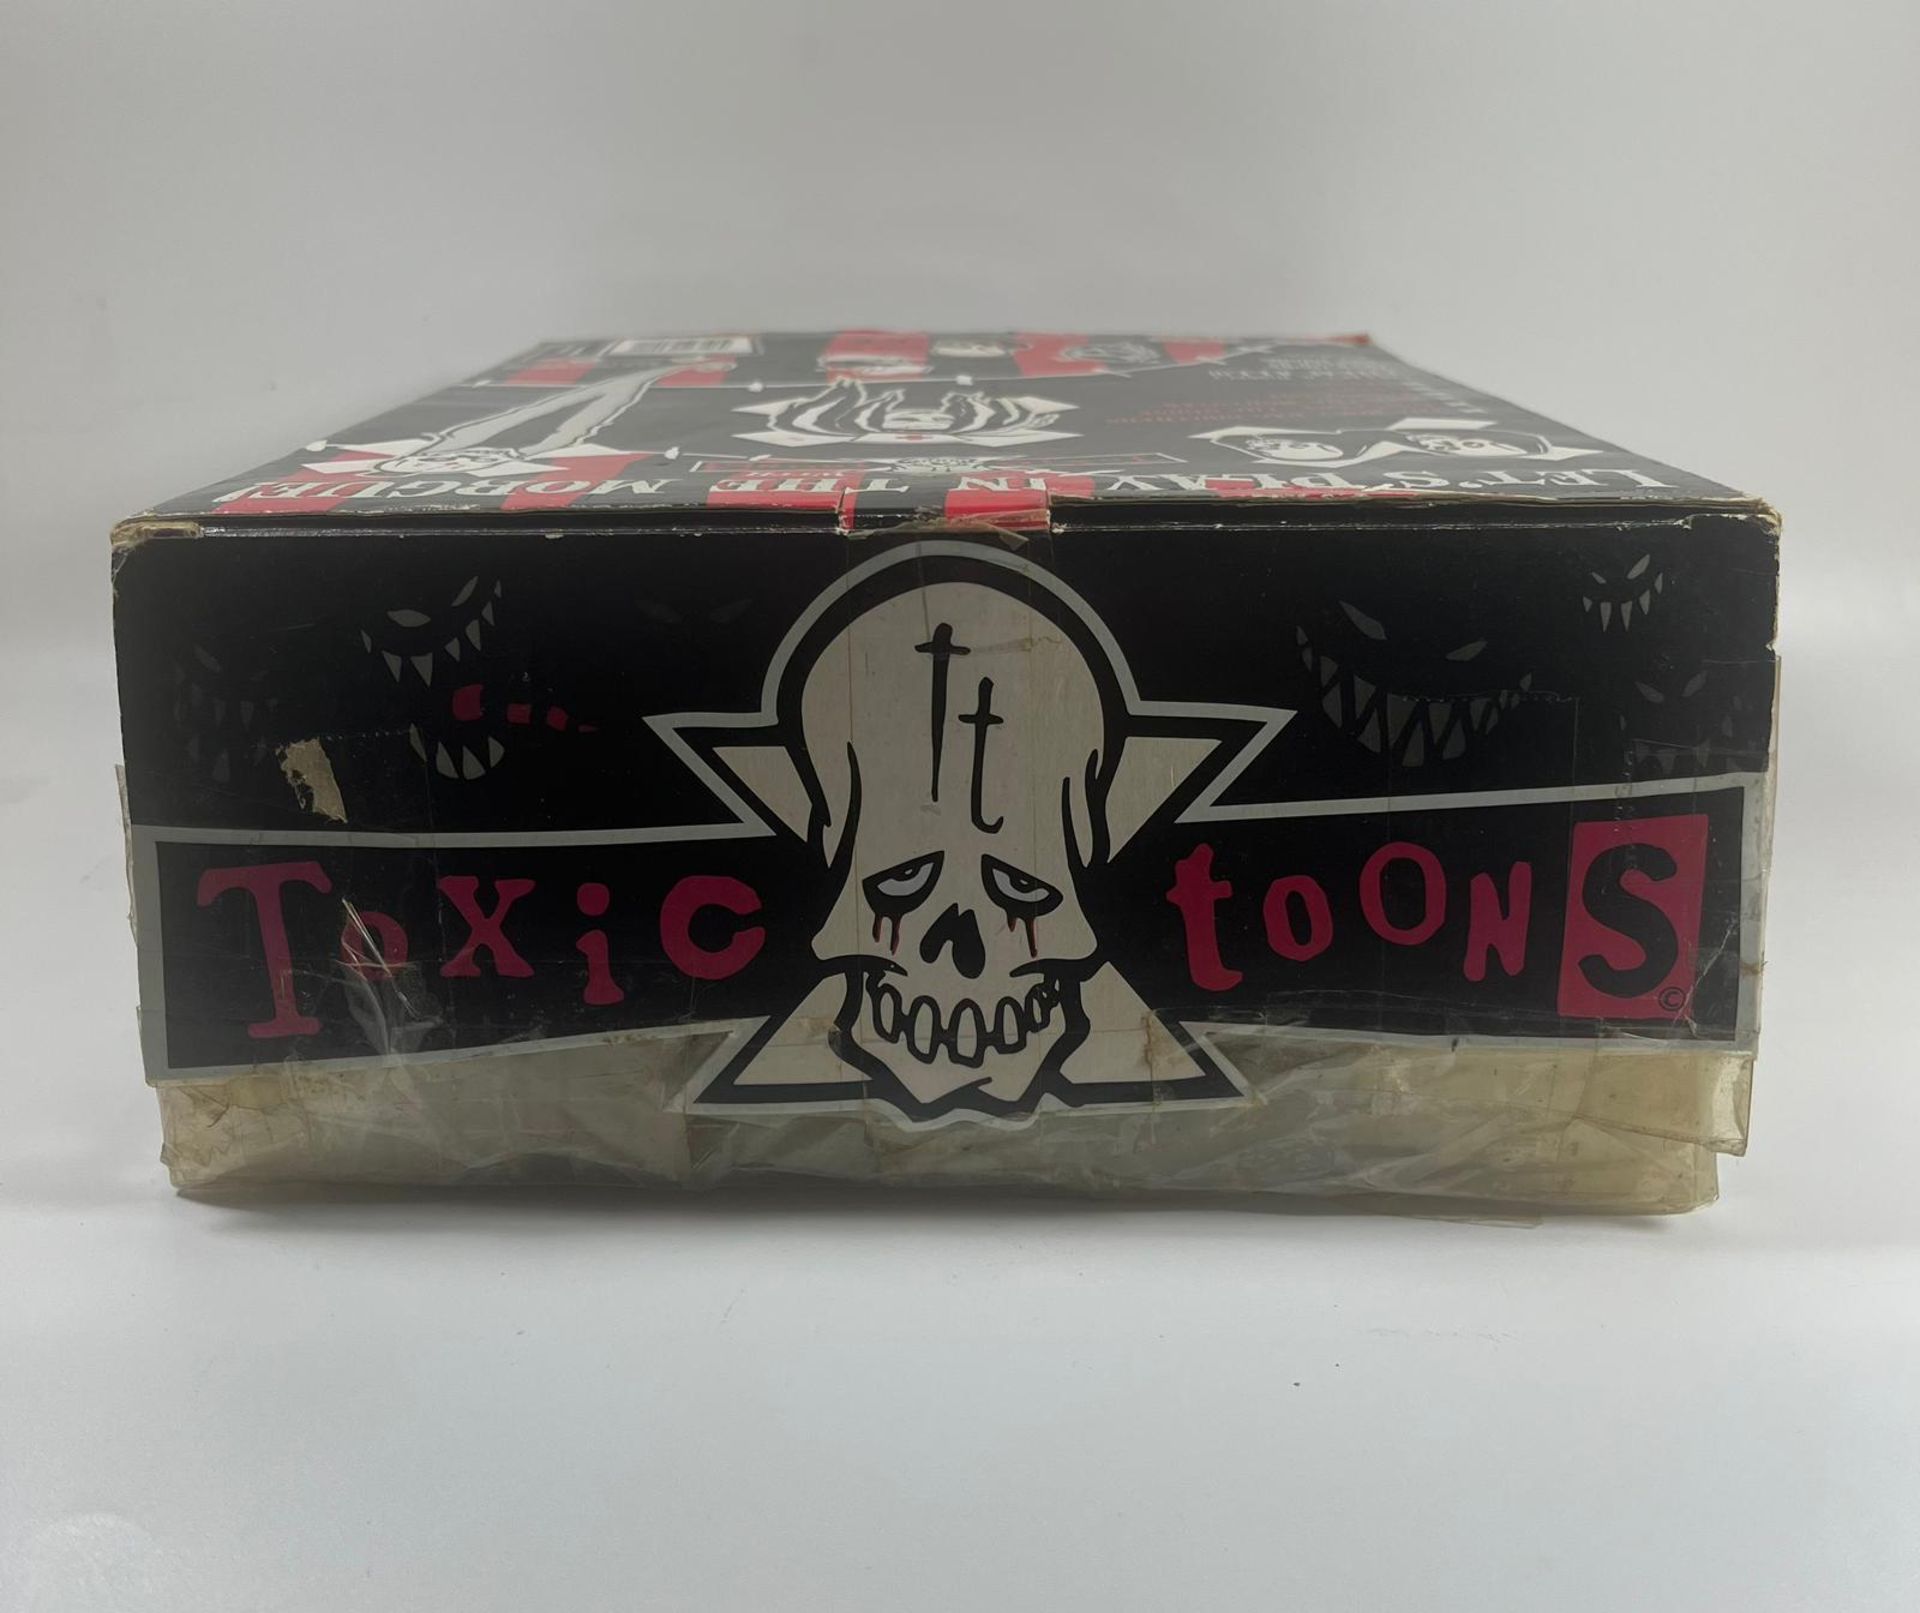 A 2004 MEZCO BOXED TOXIC TOONS THE BODY BAG BROTHERS AND MISS CERY GOTHIC FIGURES, 28 X 23 CM - Image 3 of 5